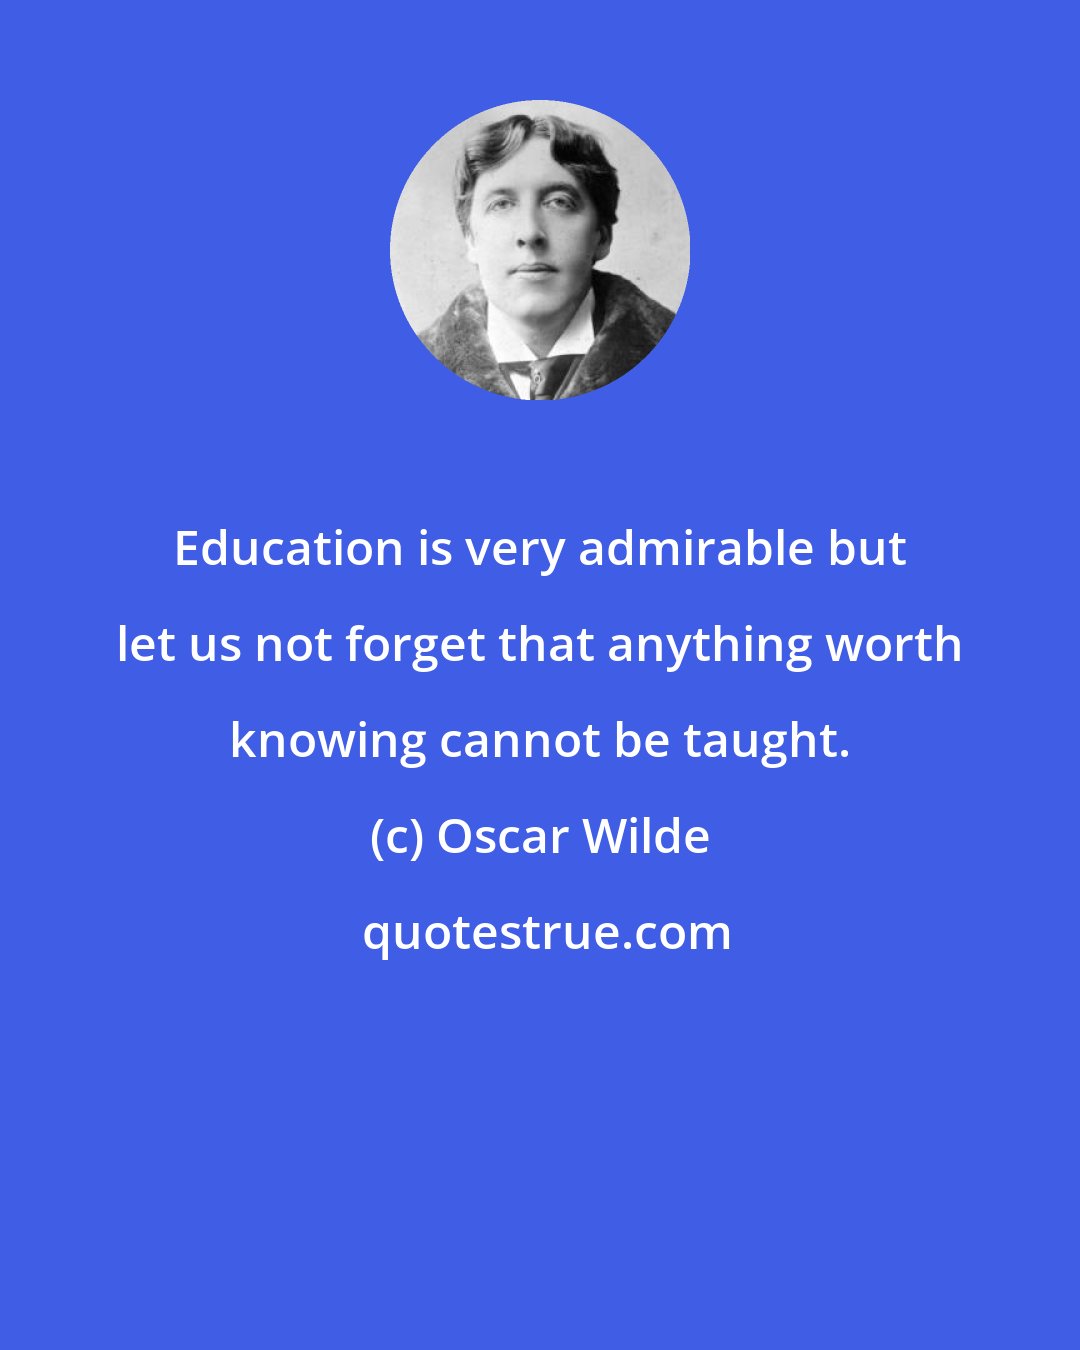 Oscar Wilde: Education is very admirable but let us not forget that anything worth knowing cannot be taught.